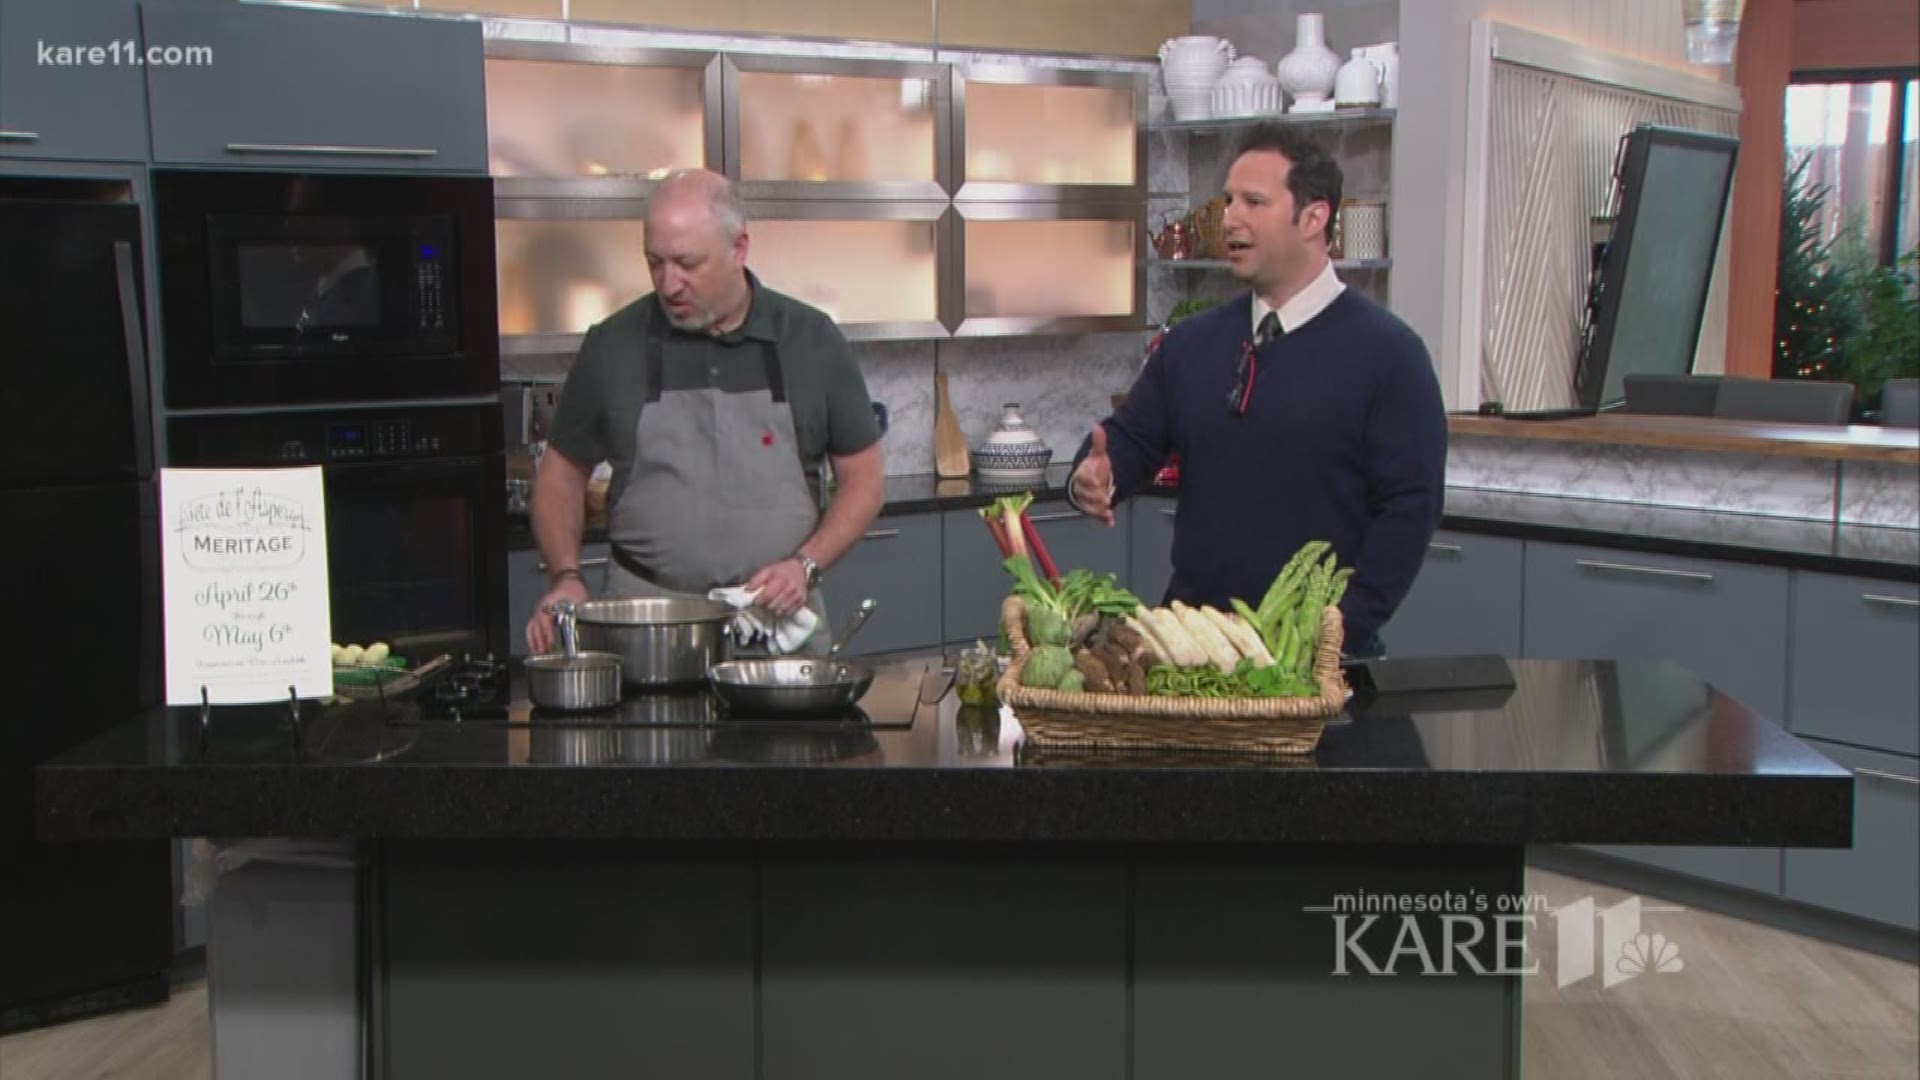 Russel Klein with Meritage in St. Paul shows us ways to cook asparagus as the season for growing asparagus approaches. 